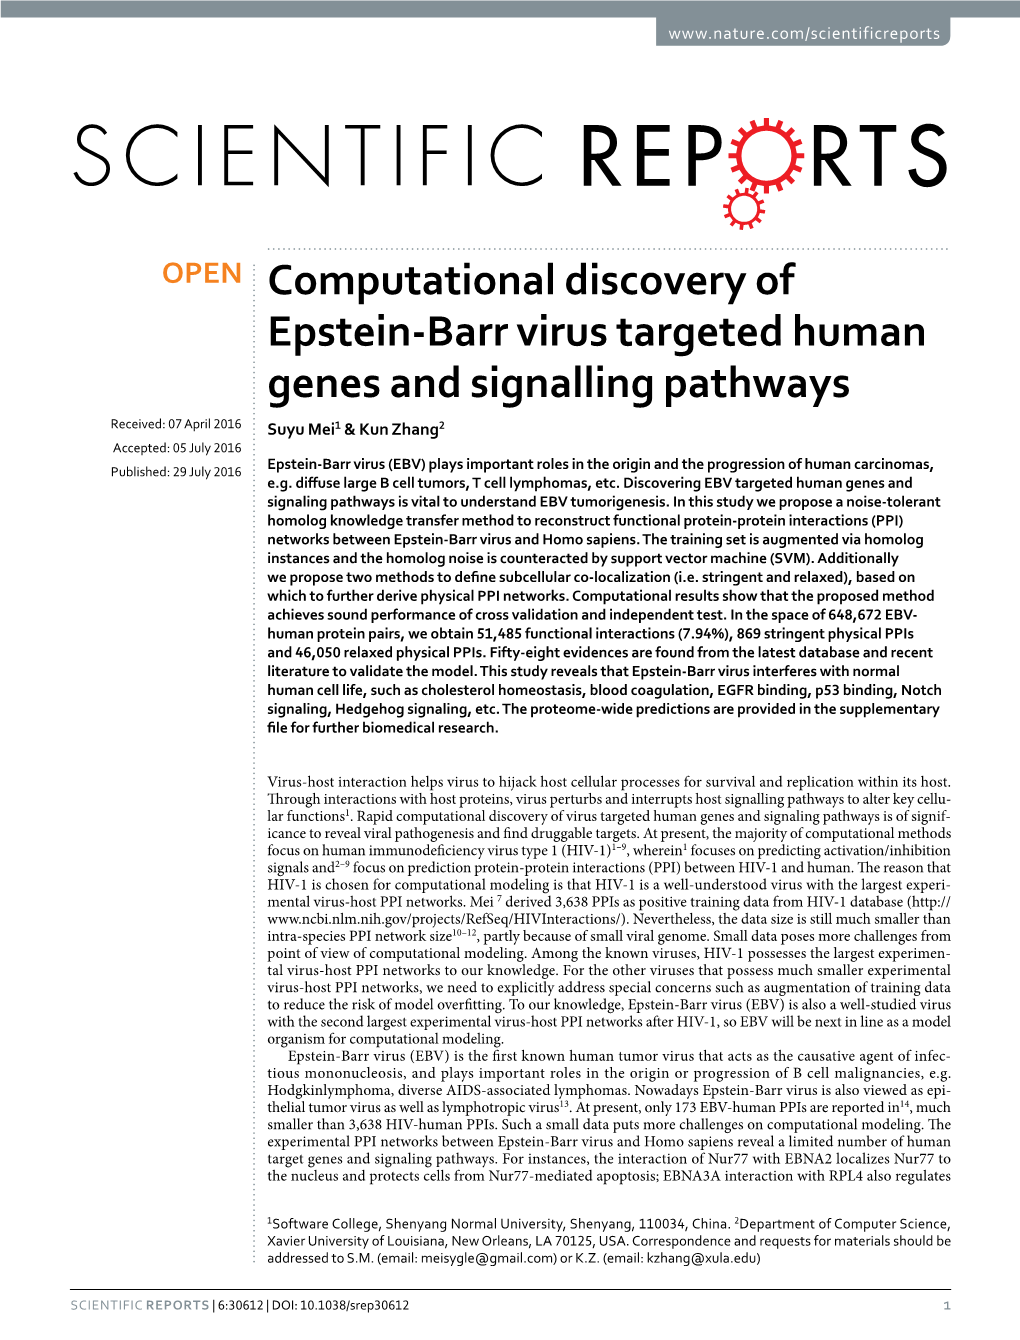 Computational Discovery of Epstein-Barr Virus Targeted Human